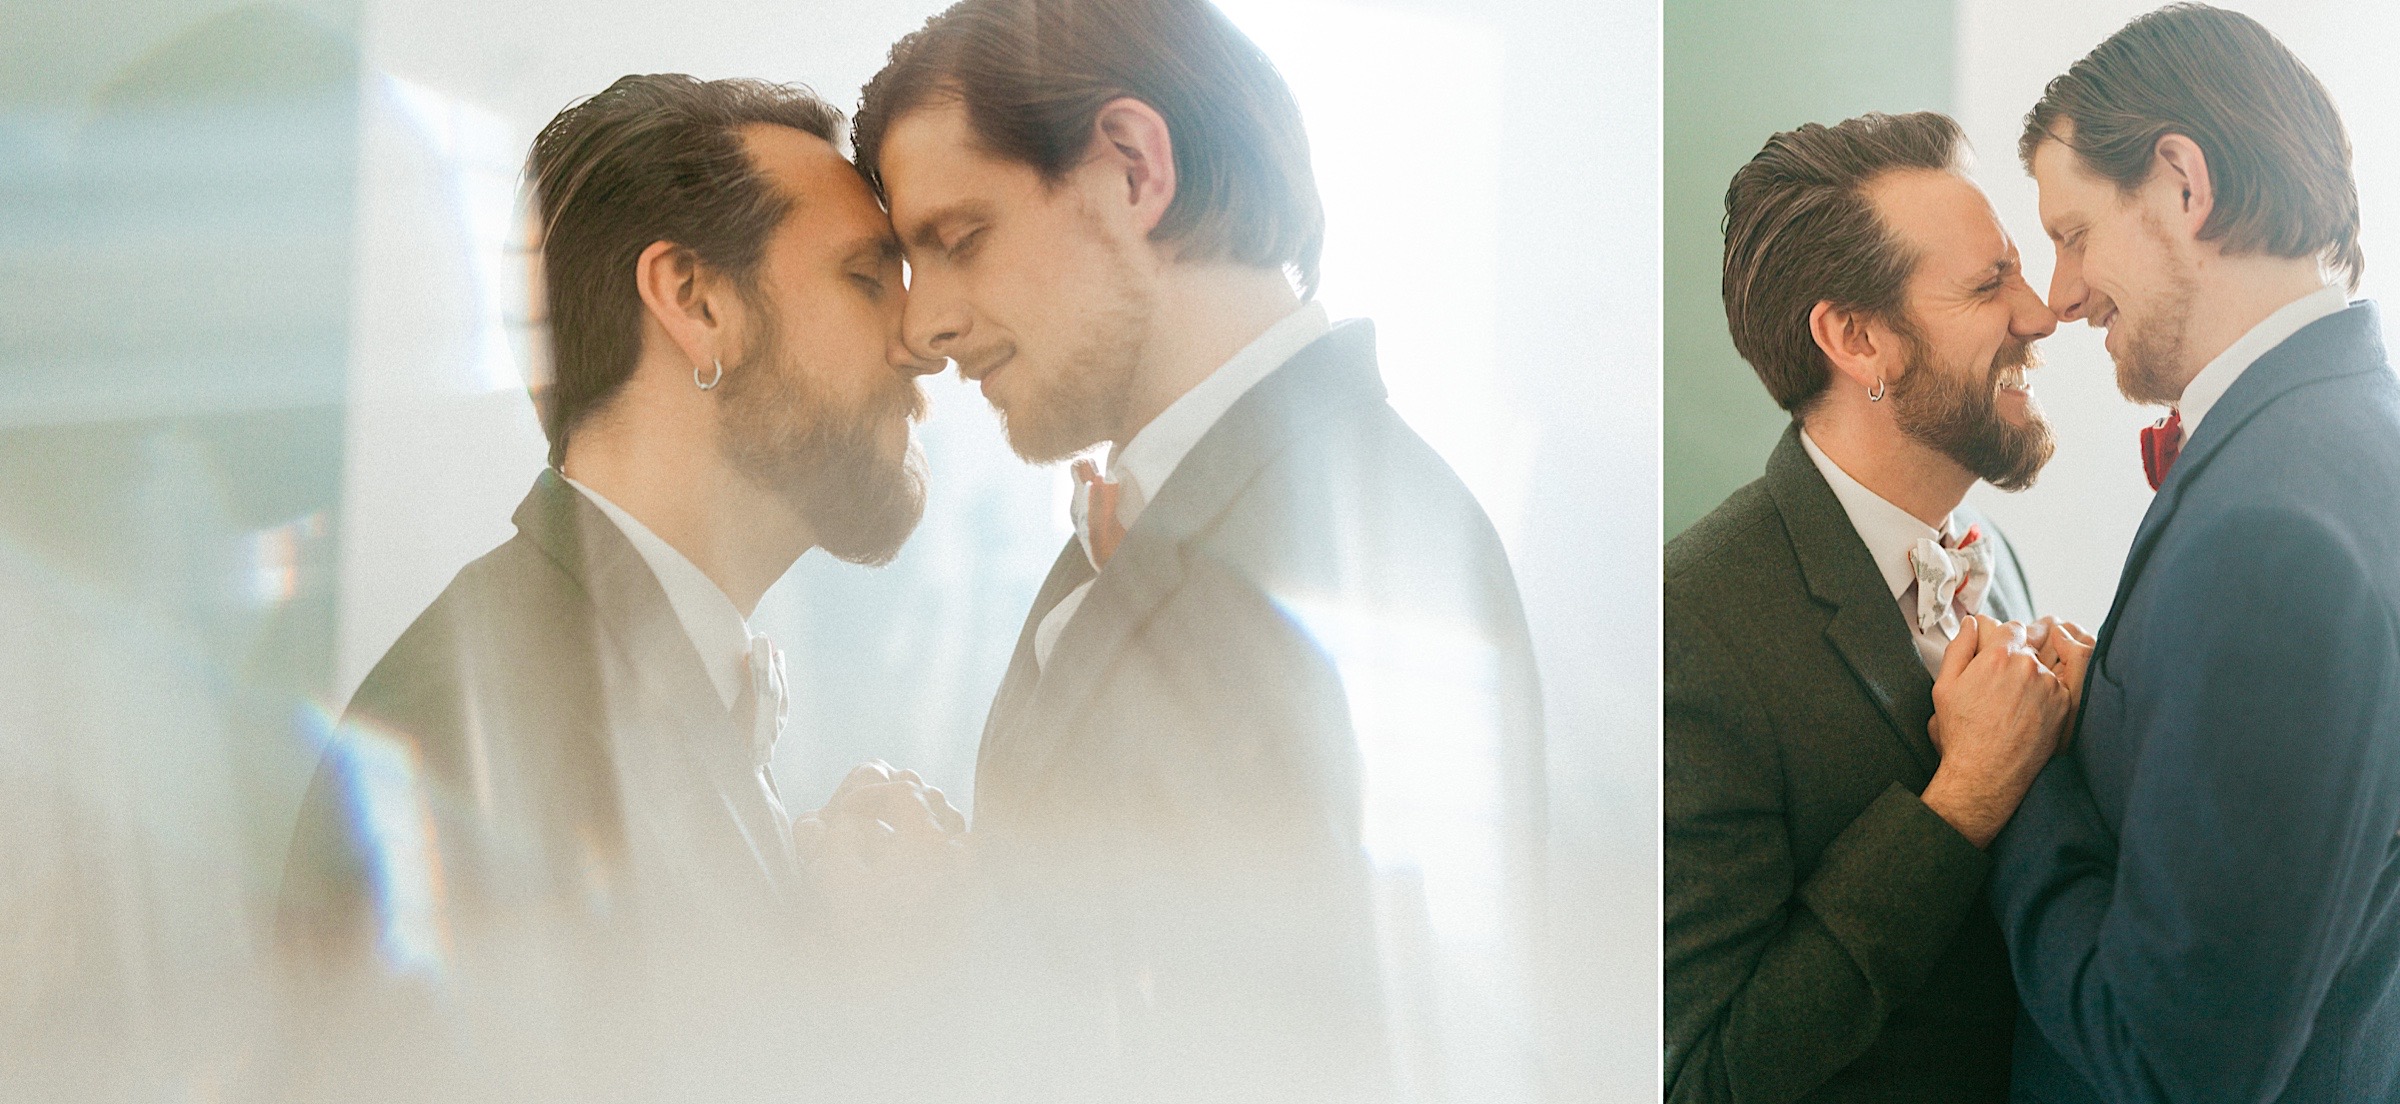 portraits-of-gay-couple-smiling-and-kissing-holding-hands-upclose